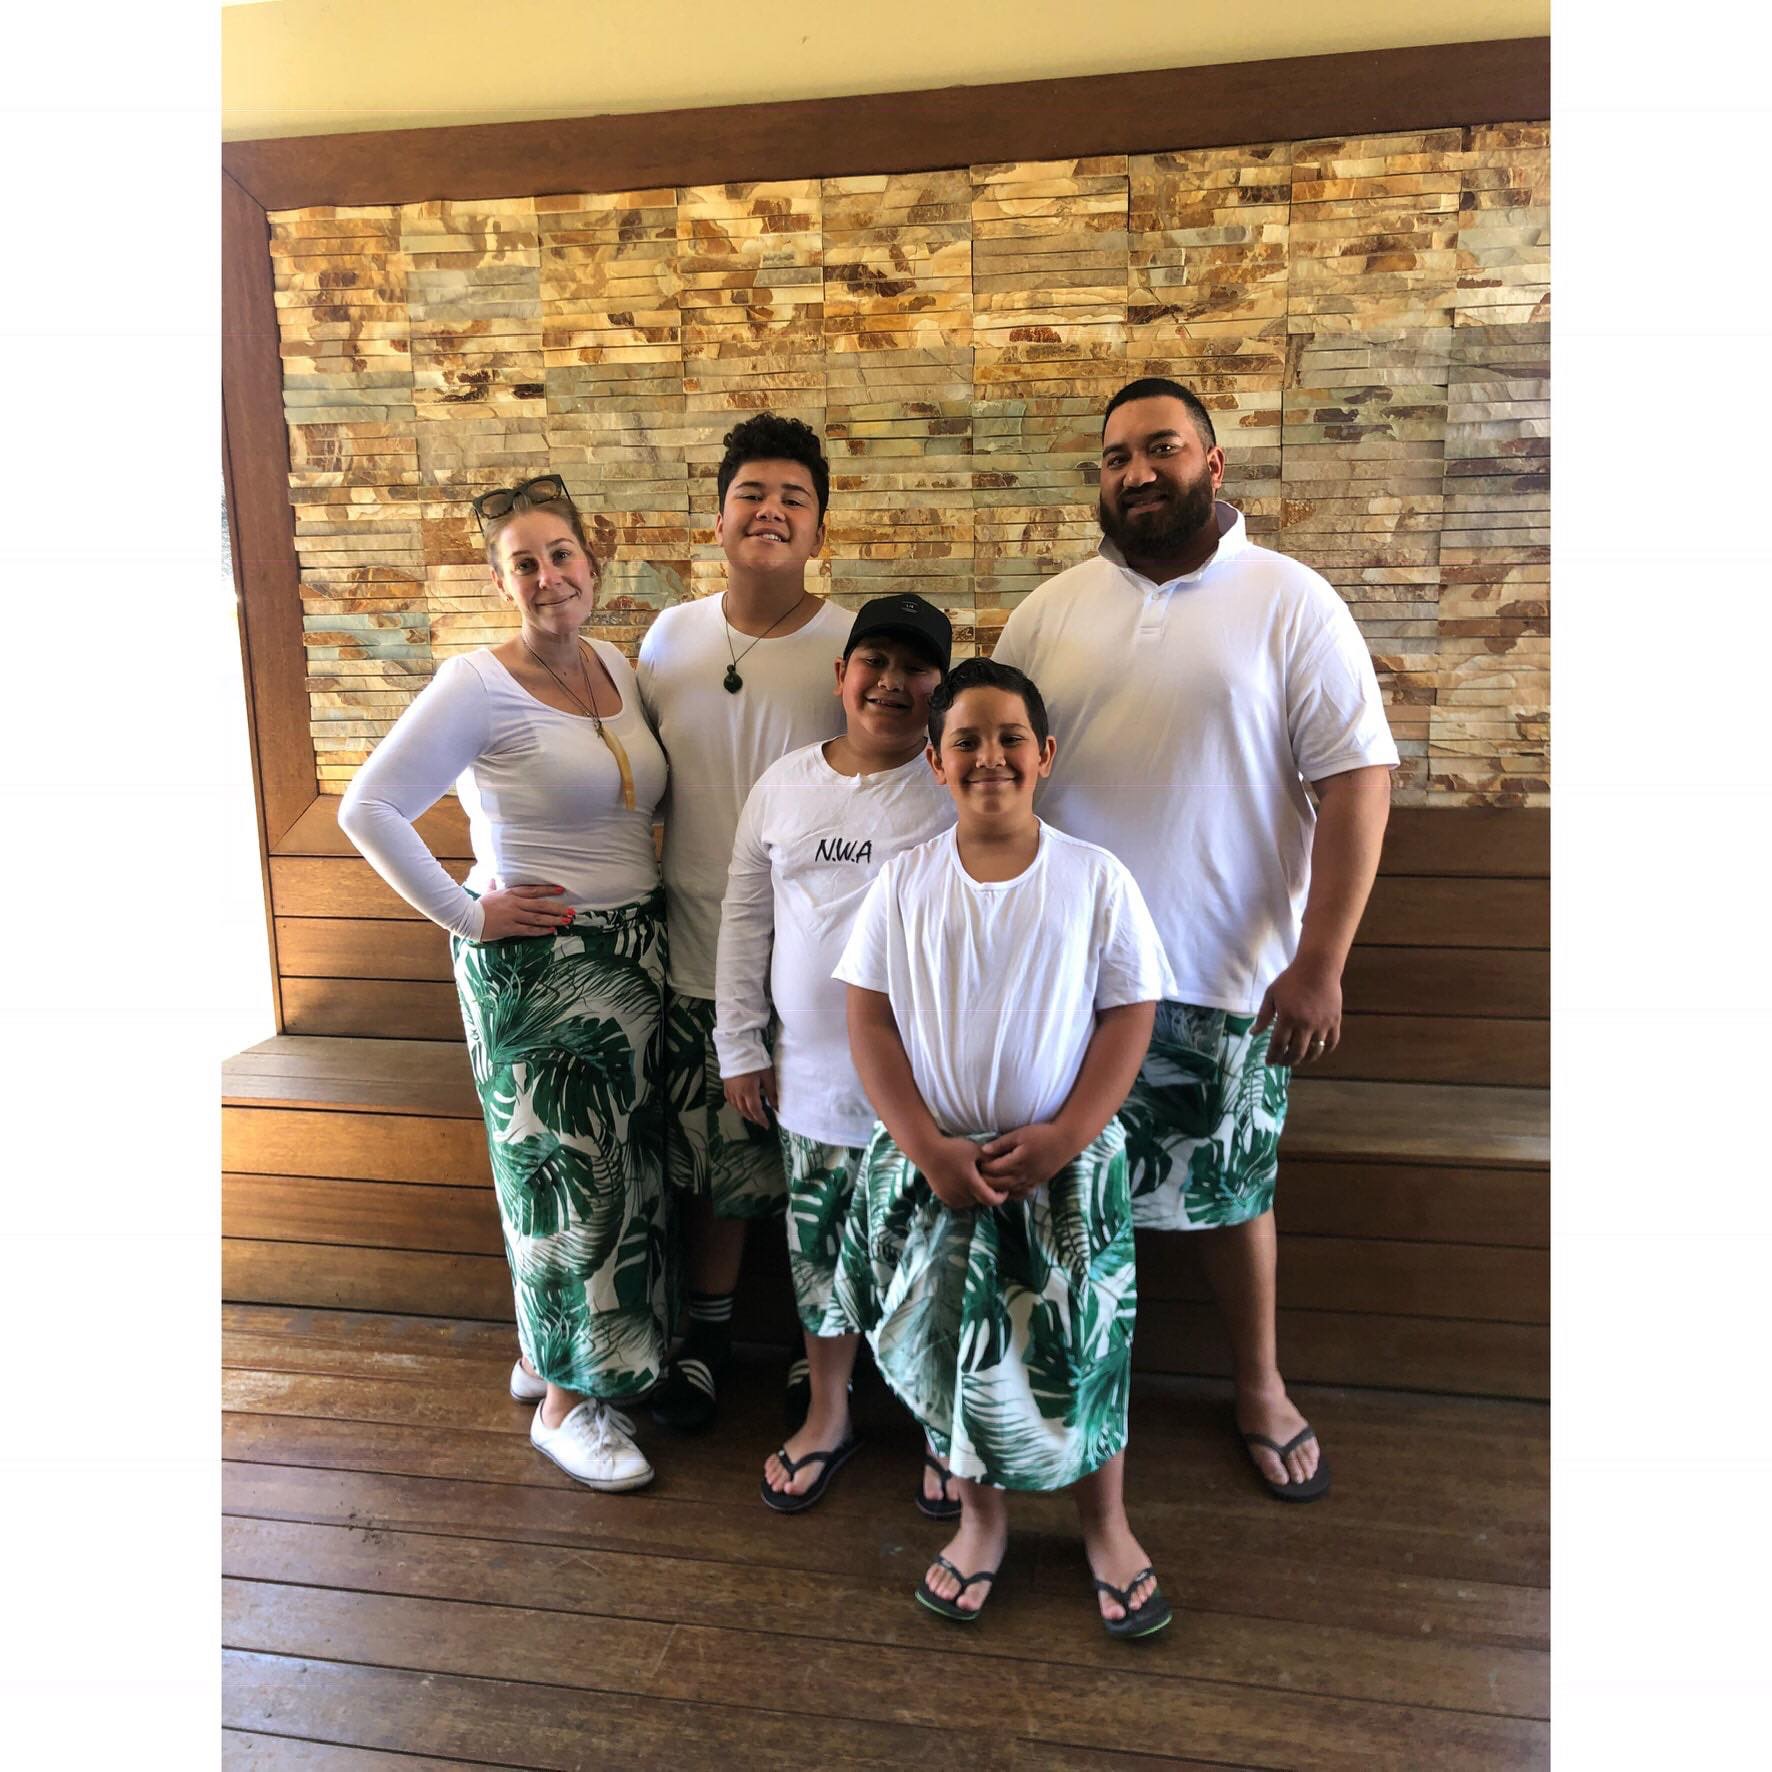 The Timoteo family connecting to their cultural heritage.